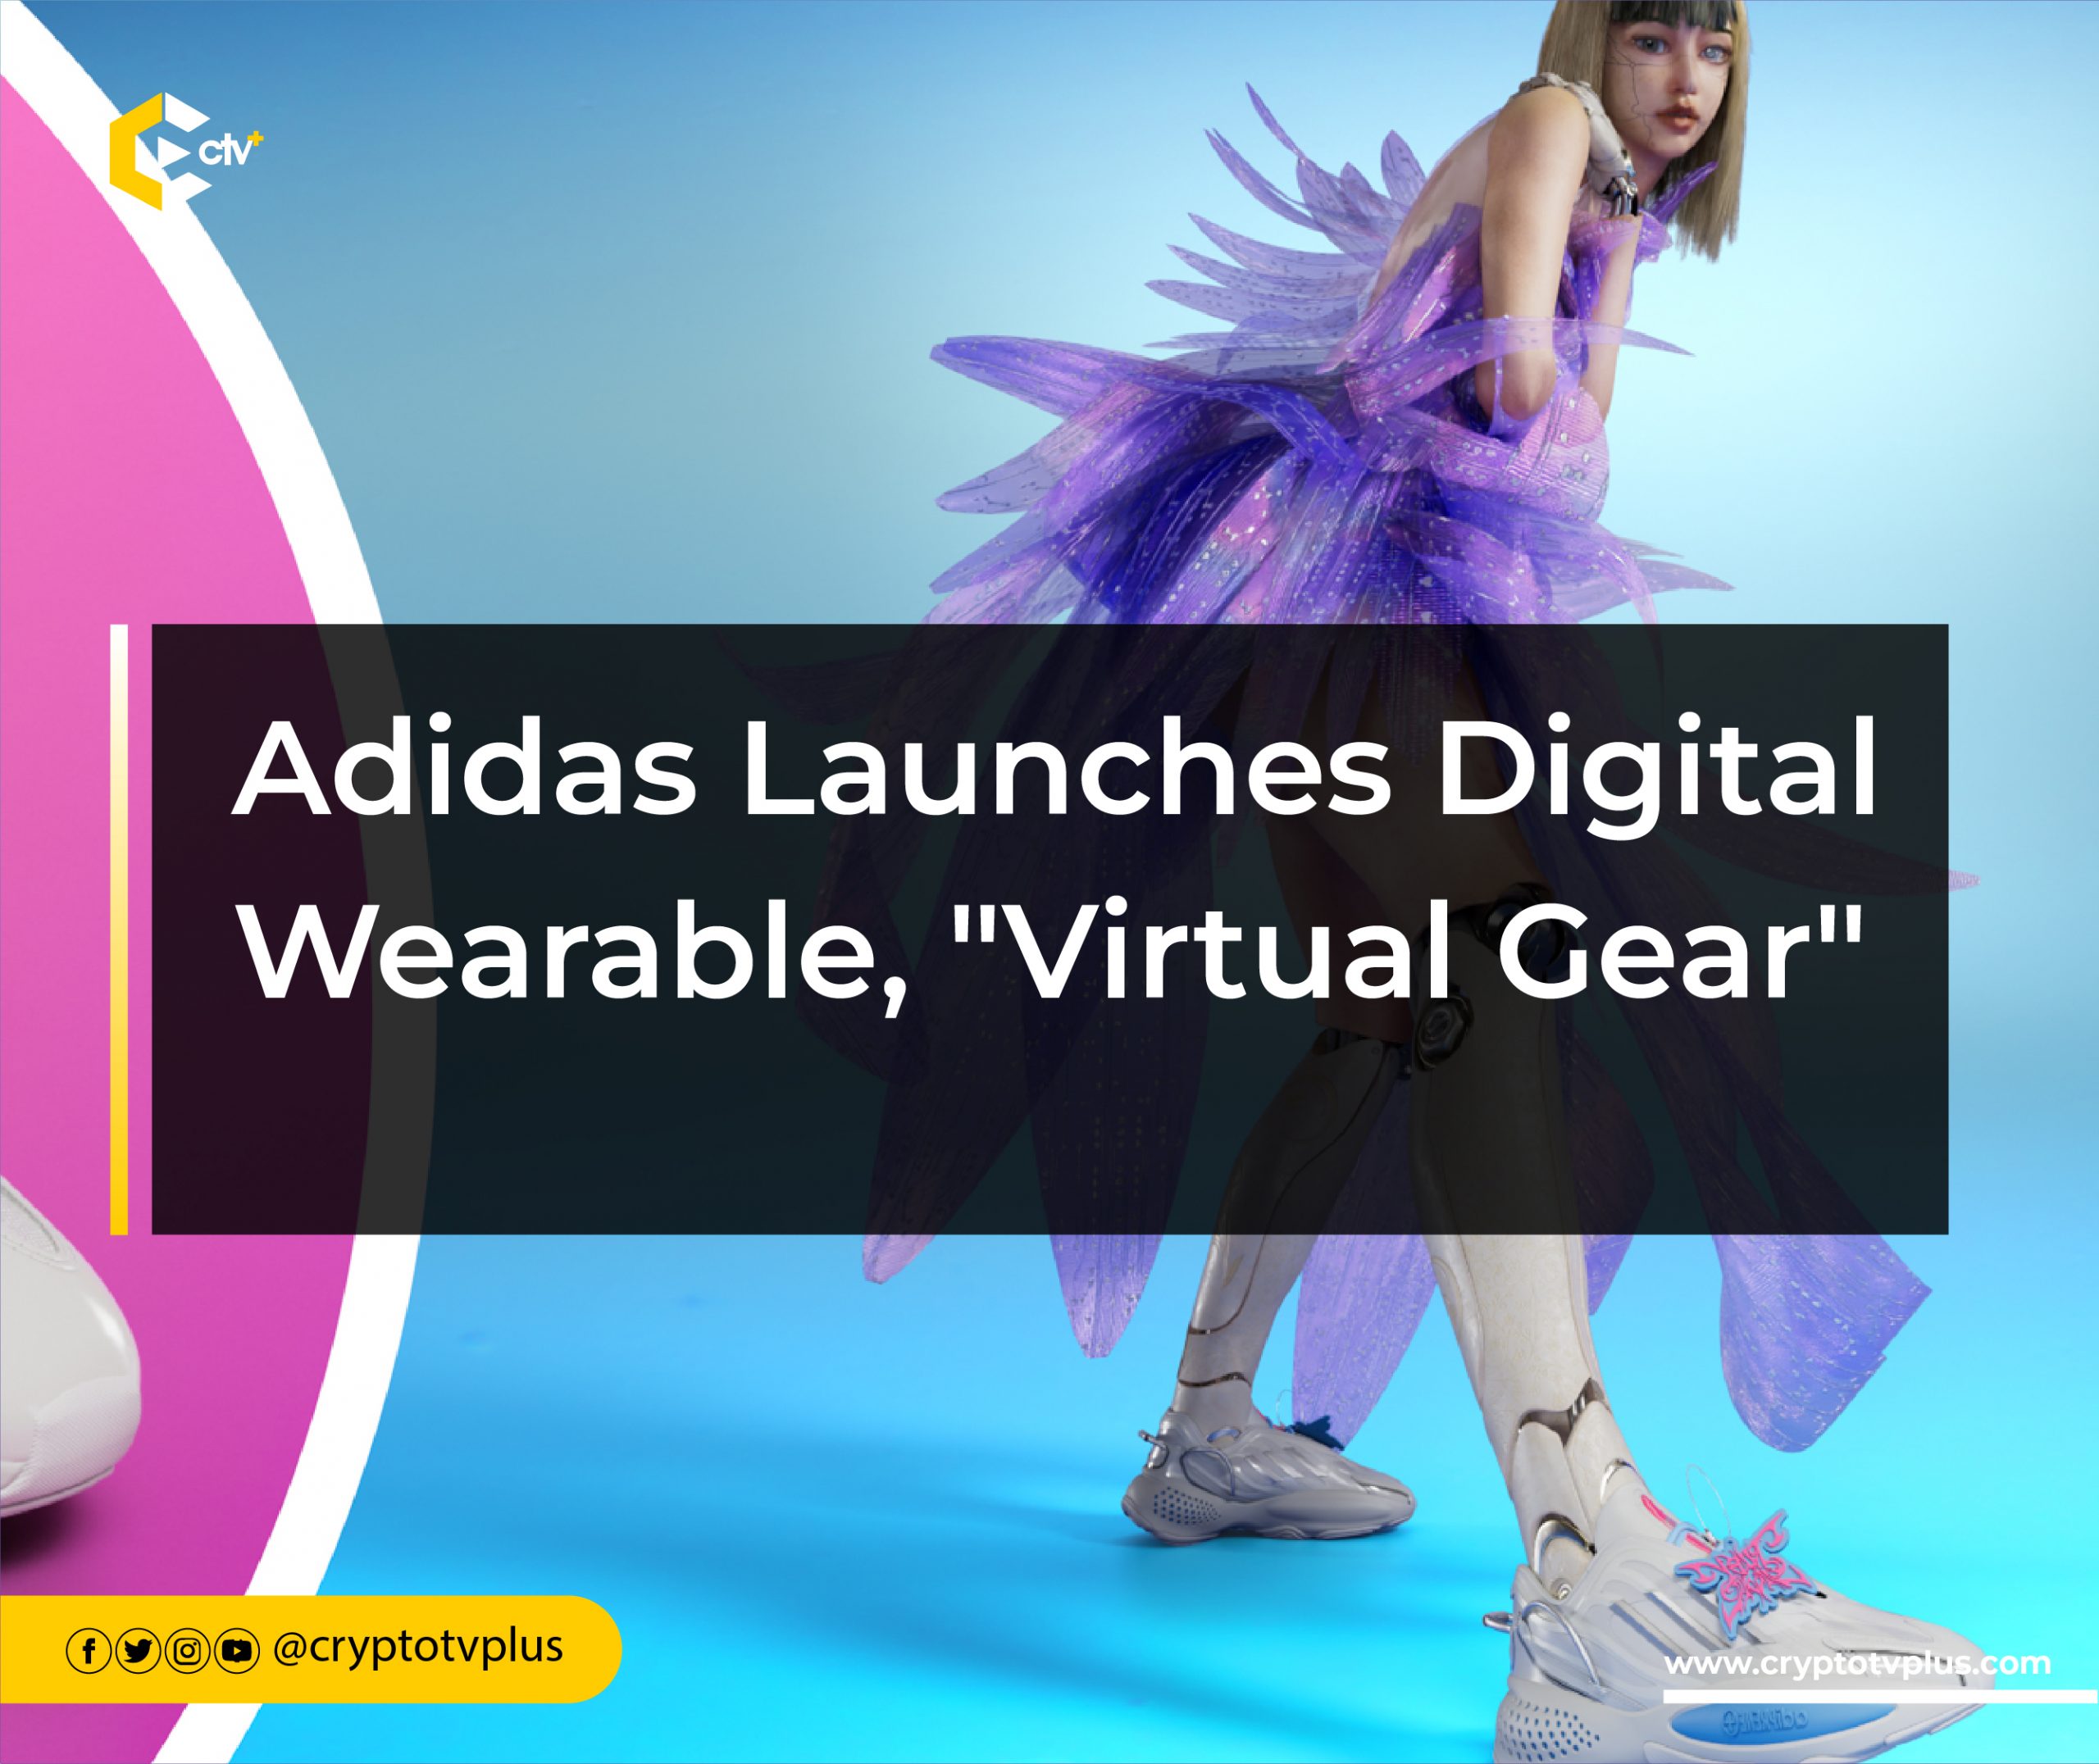 Adidas Launches Wearables, "Virtual Gear" | CryptoTvplus: DeFi, NFT, Ethereum Altcoin, Cryptocurrency & Blockchain News, Interviews, Shows